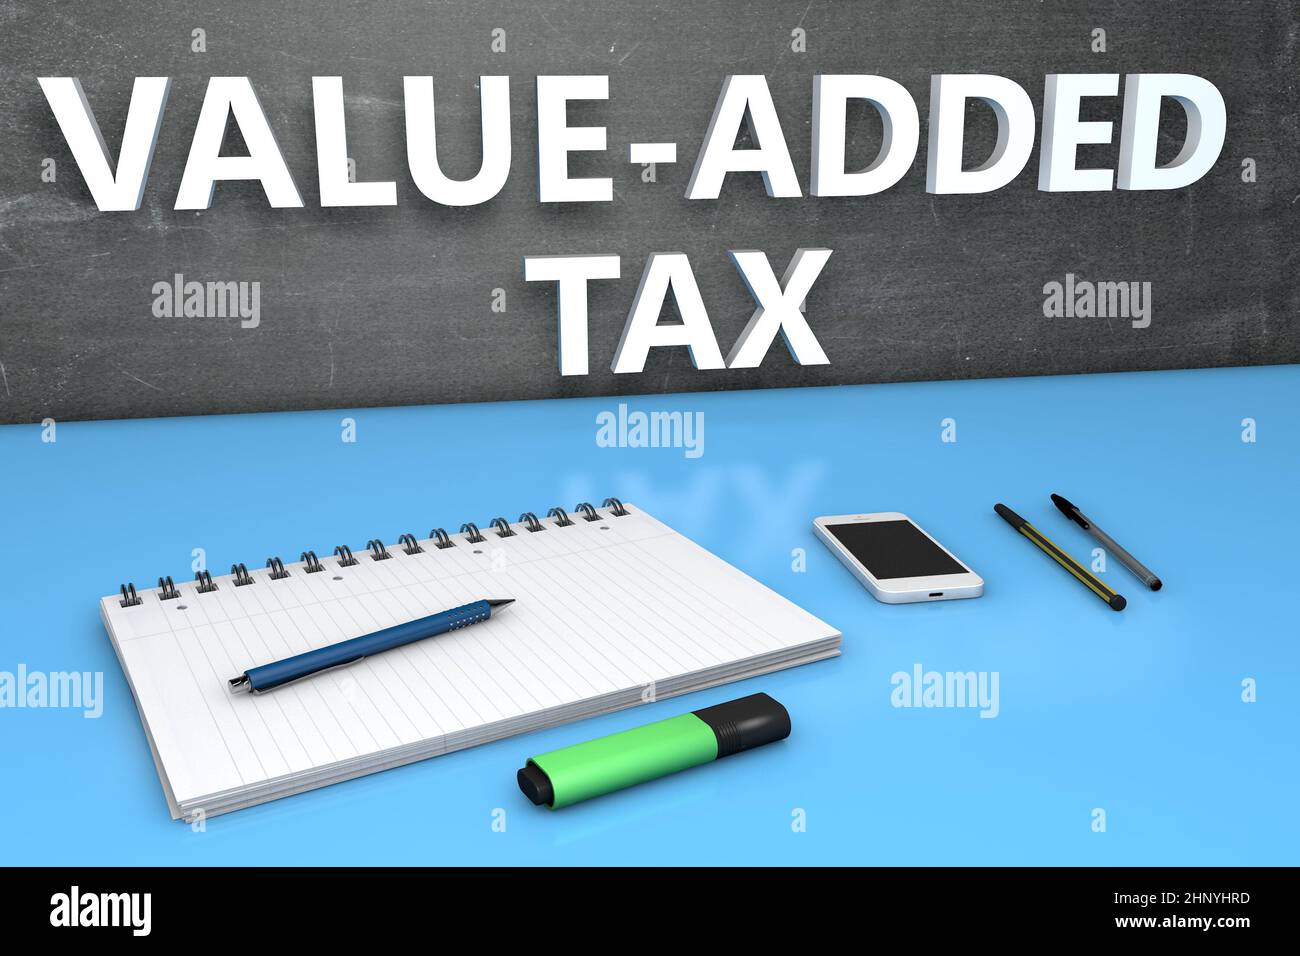 VAT - Value-added Tax - text concept with chalkboard, notebook, pens and mobile phone. 3D render illustration. Stock Photo